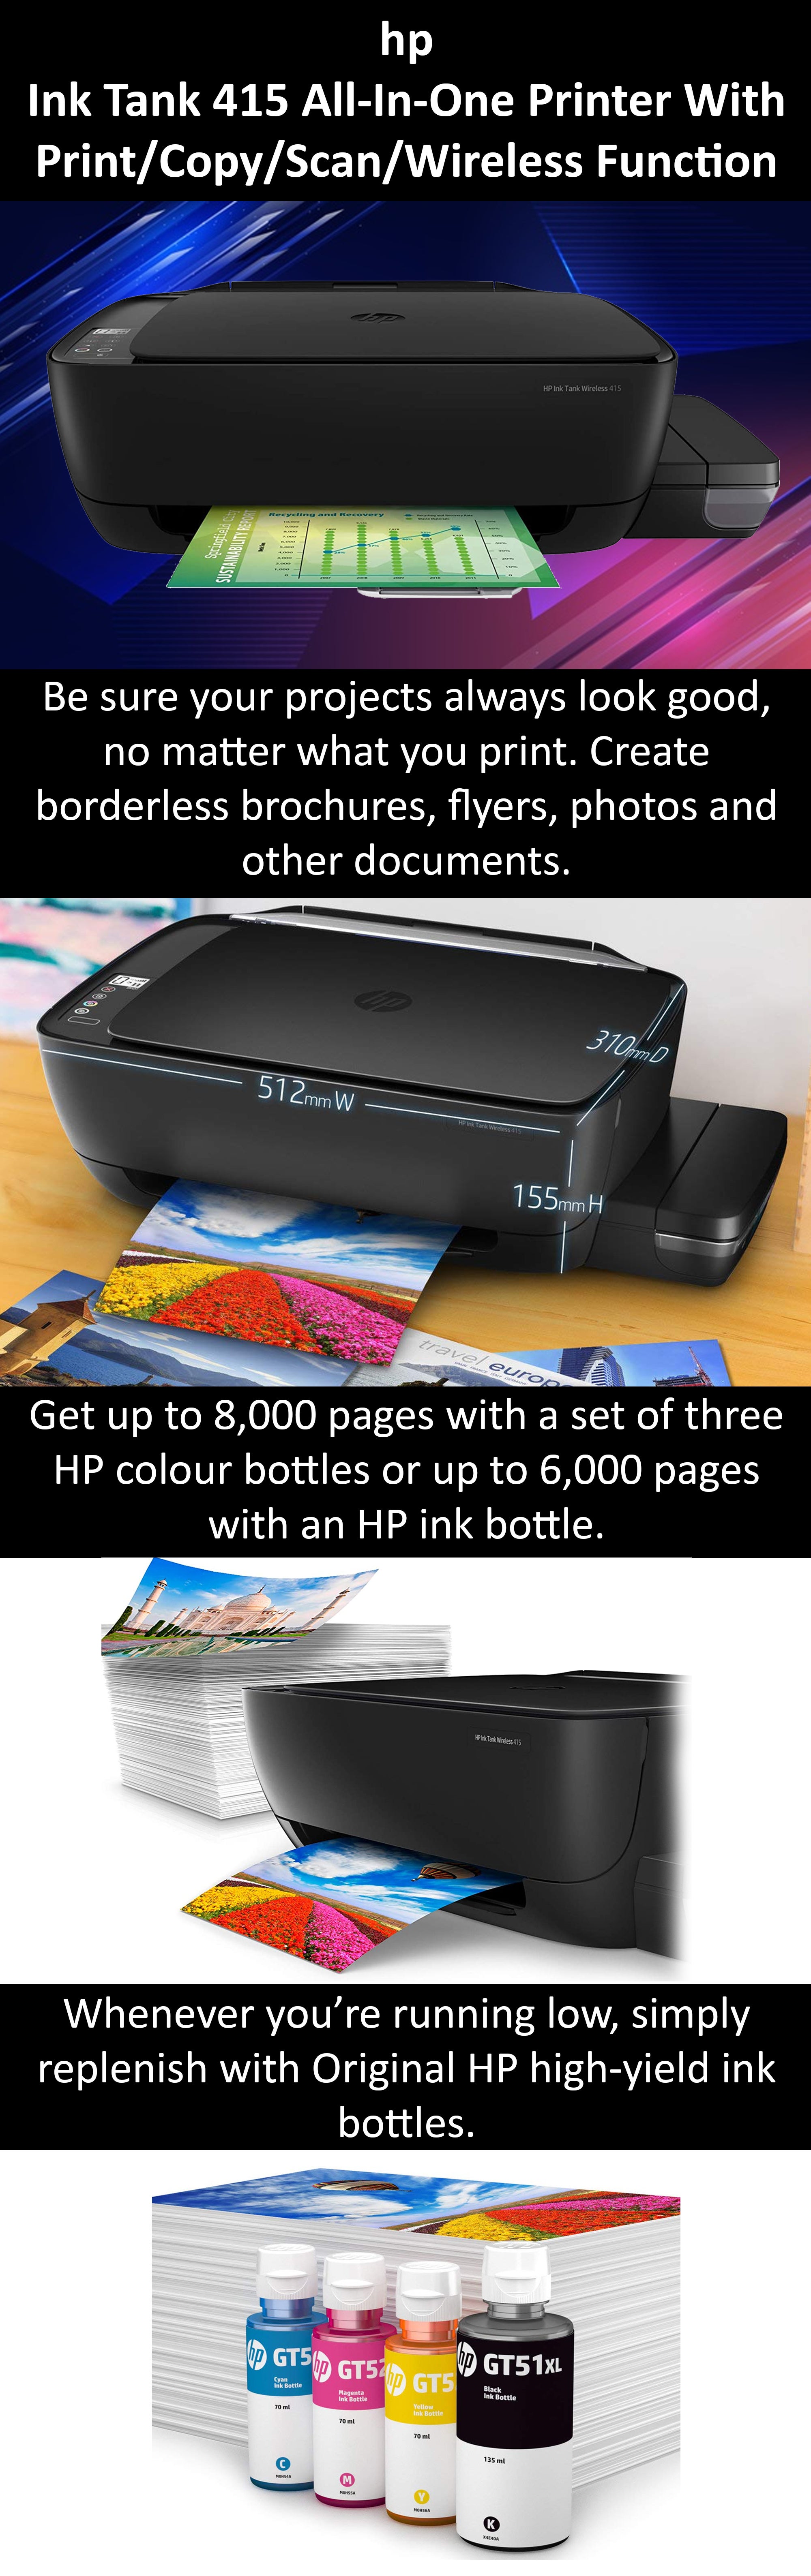 HP 415 Ink Tank Wireless Photo and Document All-in-One Printer